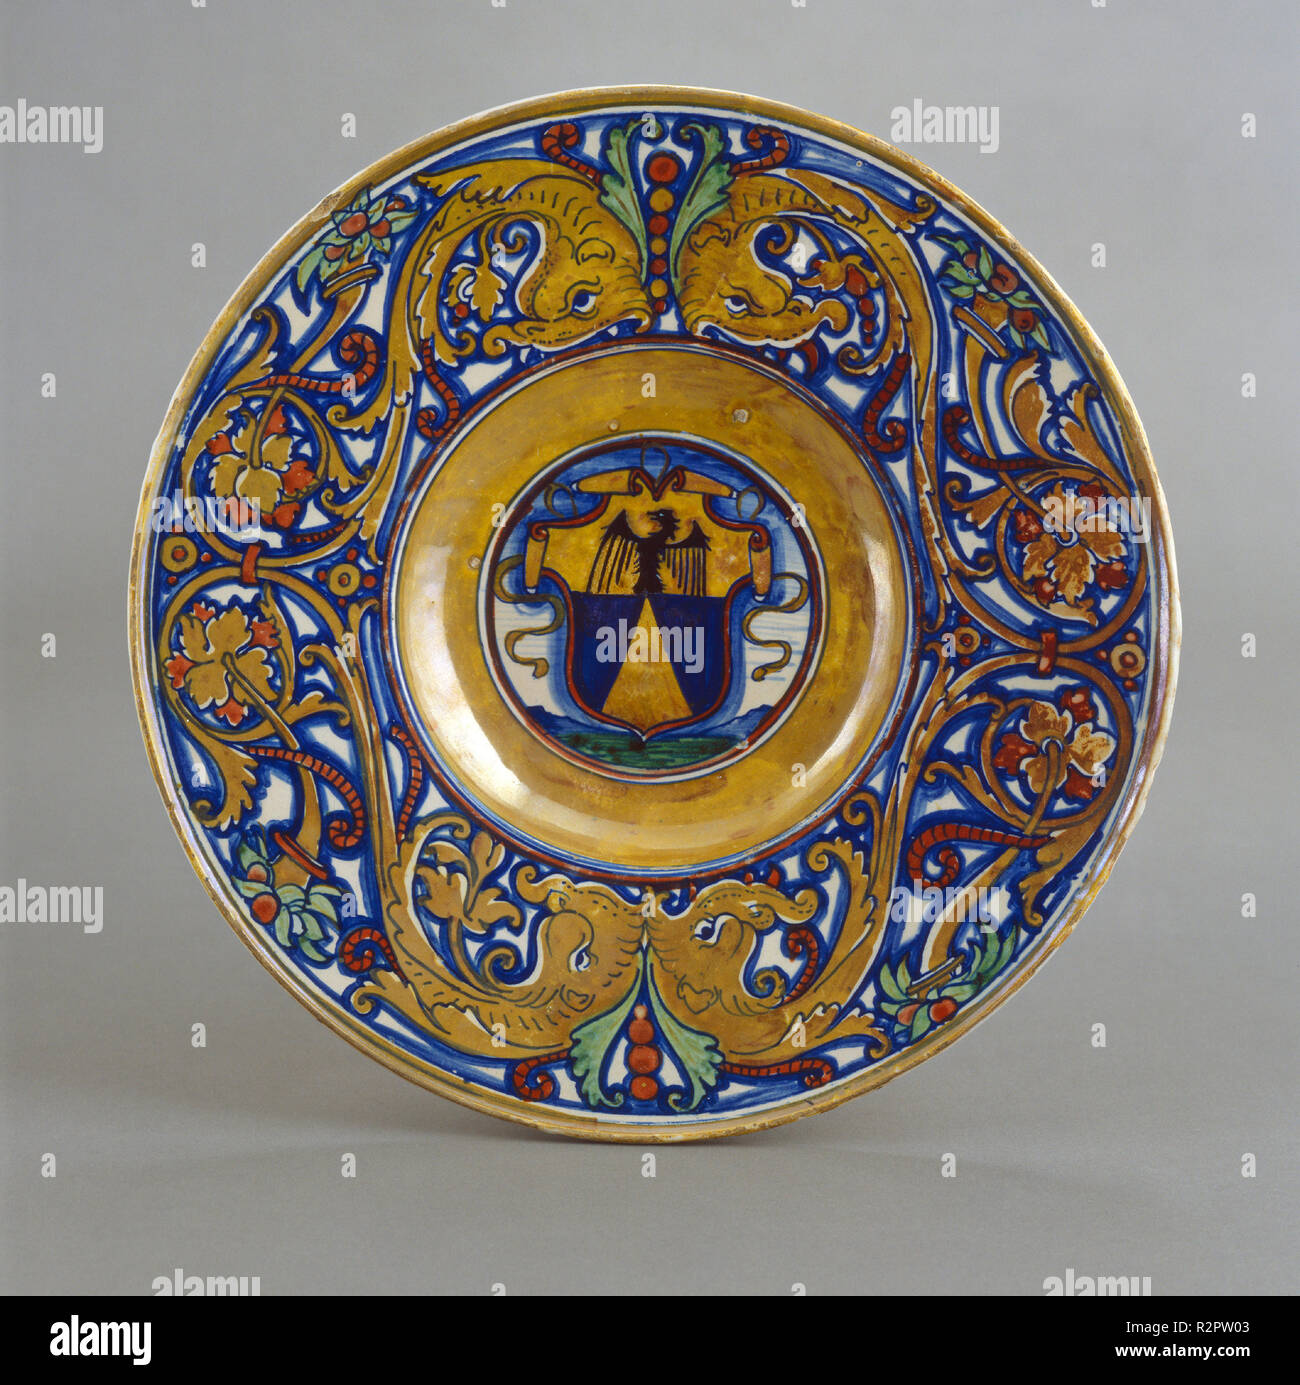 Plate with border of foliate scrollwork with dolphin heads and cornucopias; in the center, shield of arms of Vigerio of Savona. Dated: 1524. Dimensions: overall (diameter): 36.5 cm (14 3/8 in.). Medium: tin-glazed earthenware (maiolica). Museum: National Gallery of Art, Washington DC. Author: Workshop of Maestro Giorgio Andreoli of Gubbio. Stock Photo